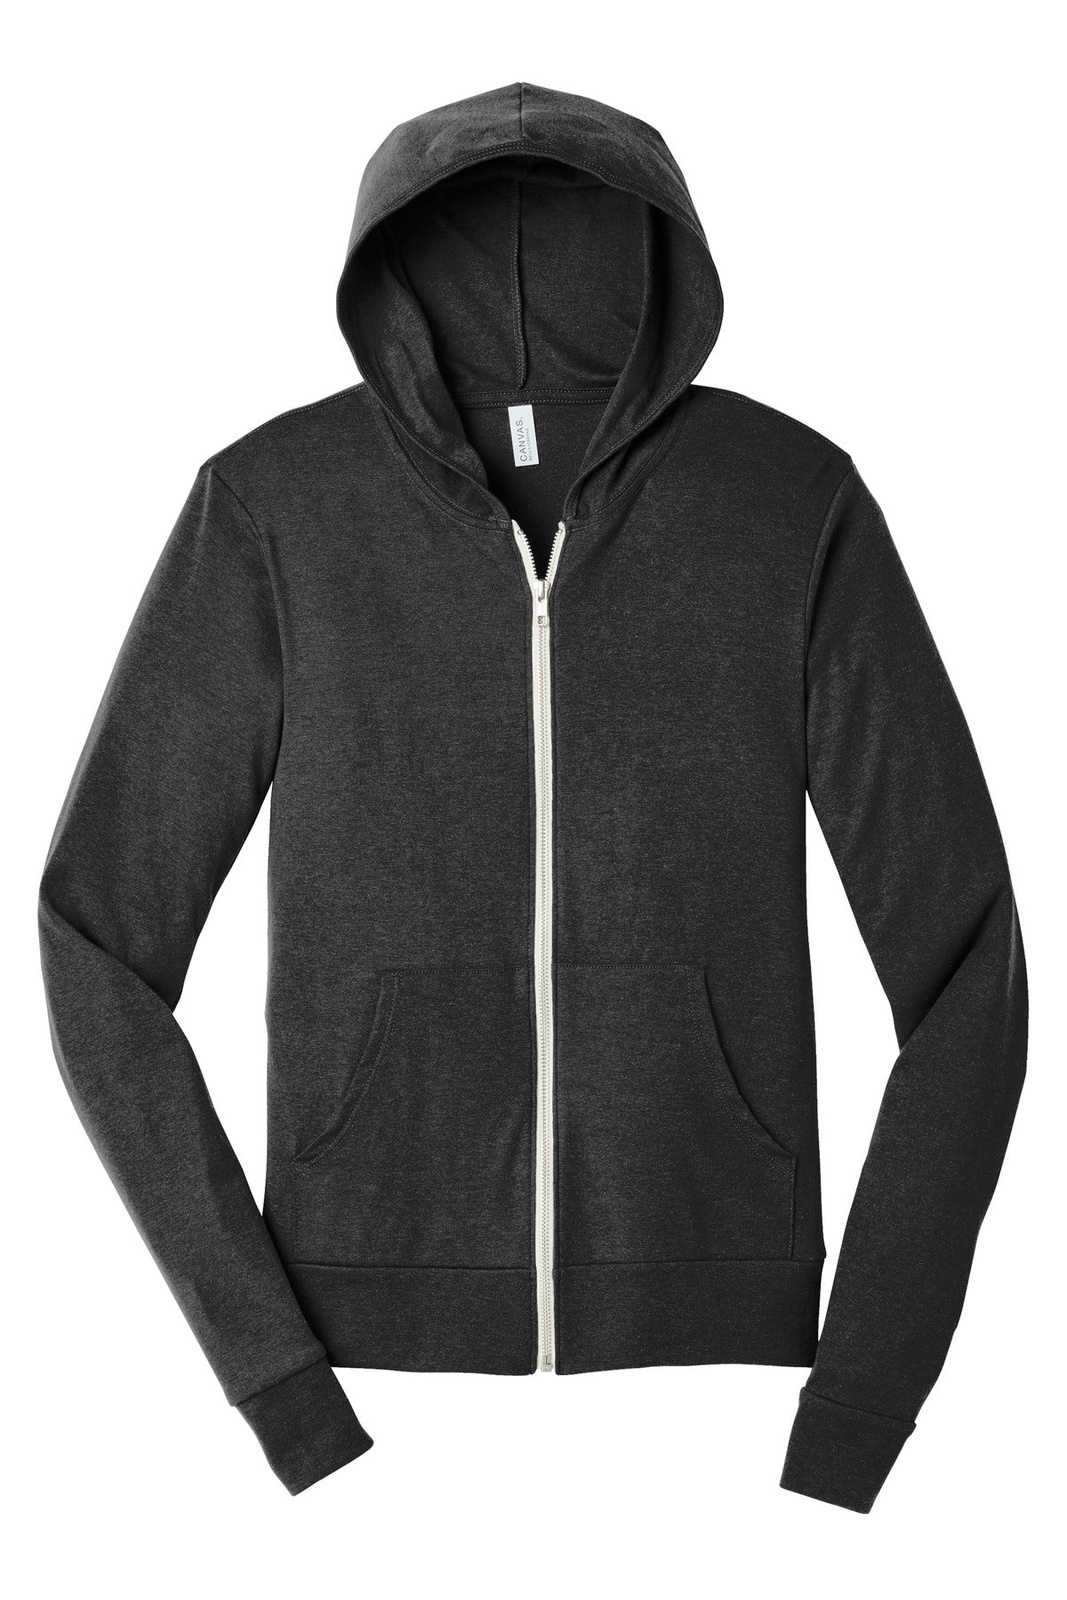 Bella + Canvas 3939 Unisex Triblend Full-Zip Lightweight Hoodie - Charcoal-Black Triblend - HIT a Double